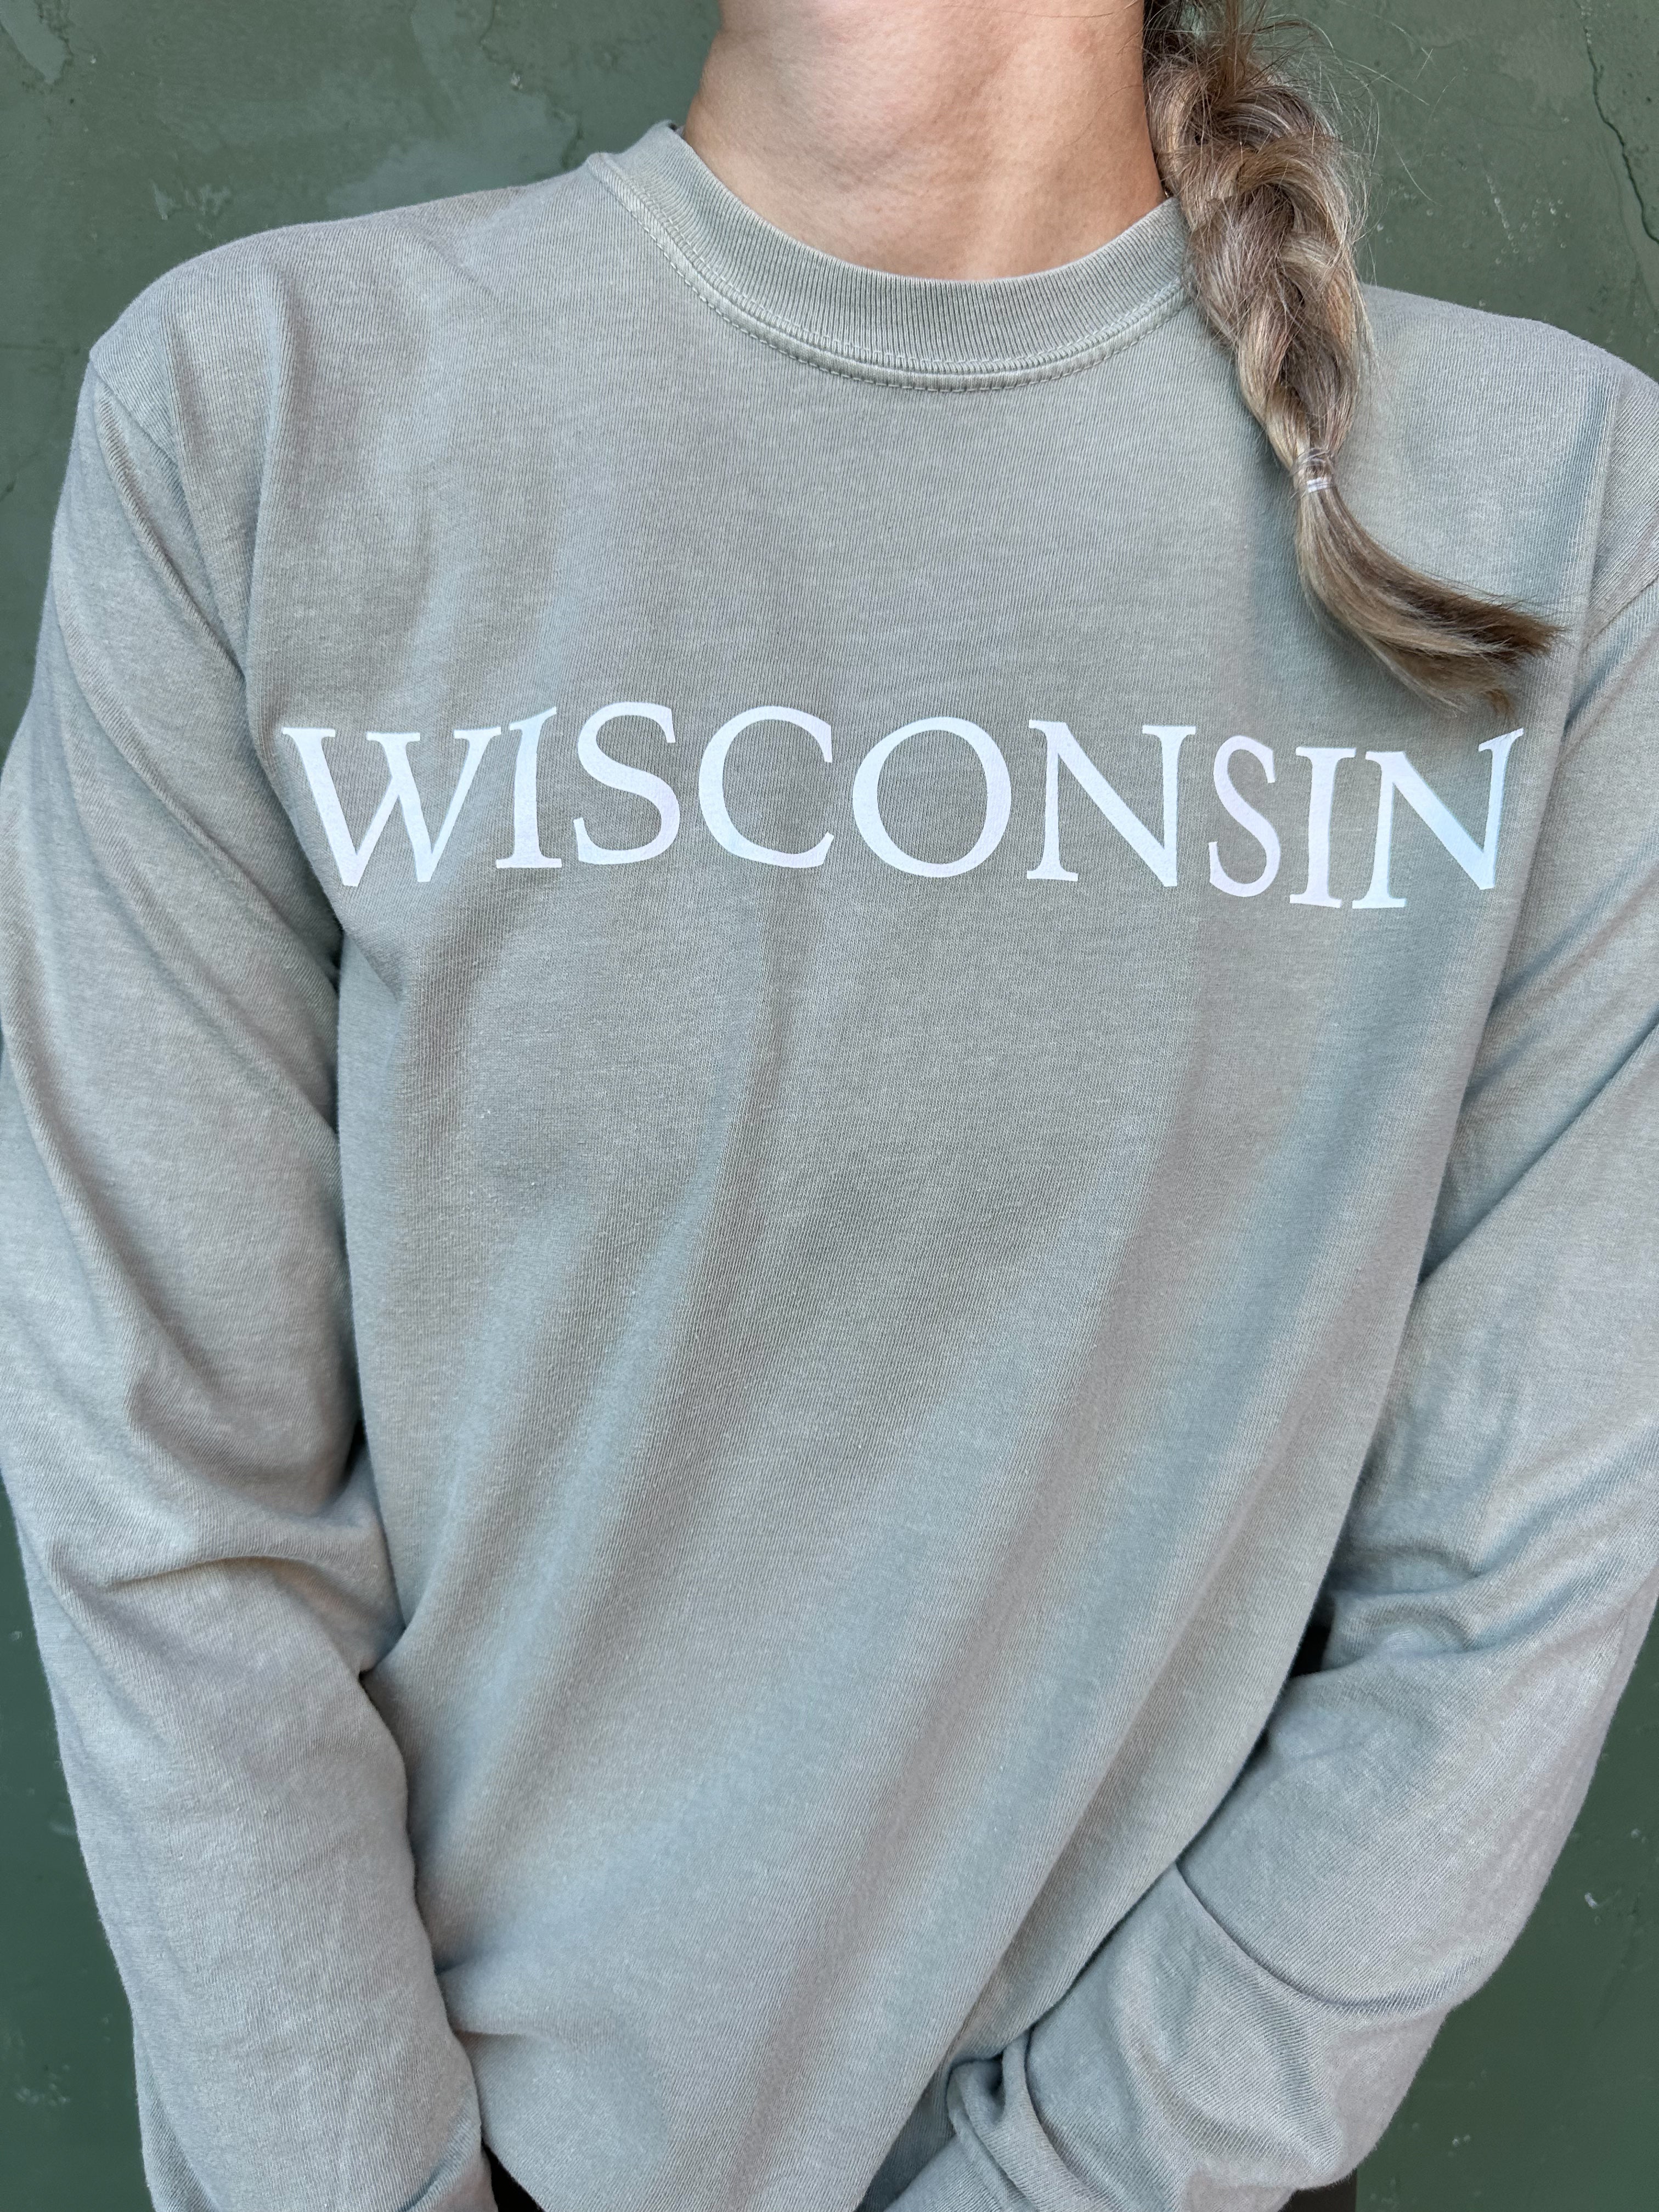 the Wisconsin Long Sleeve